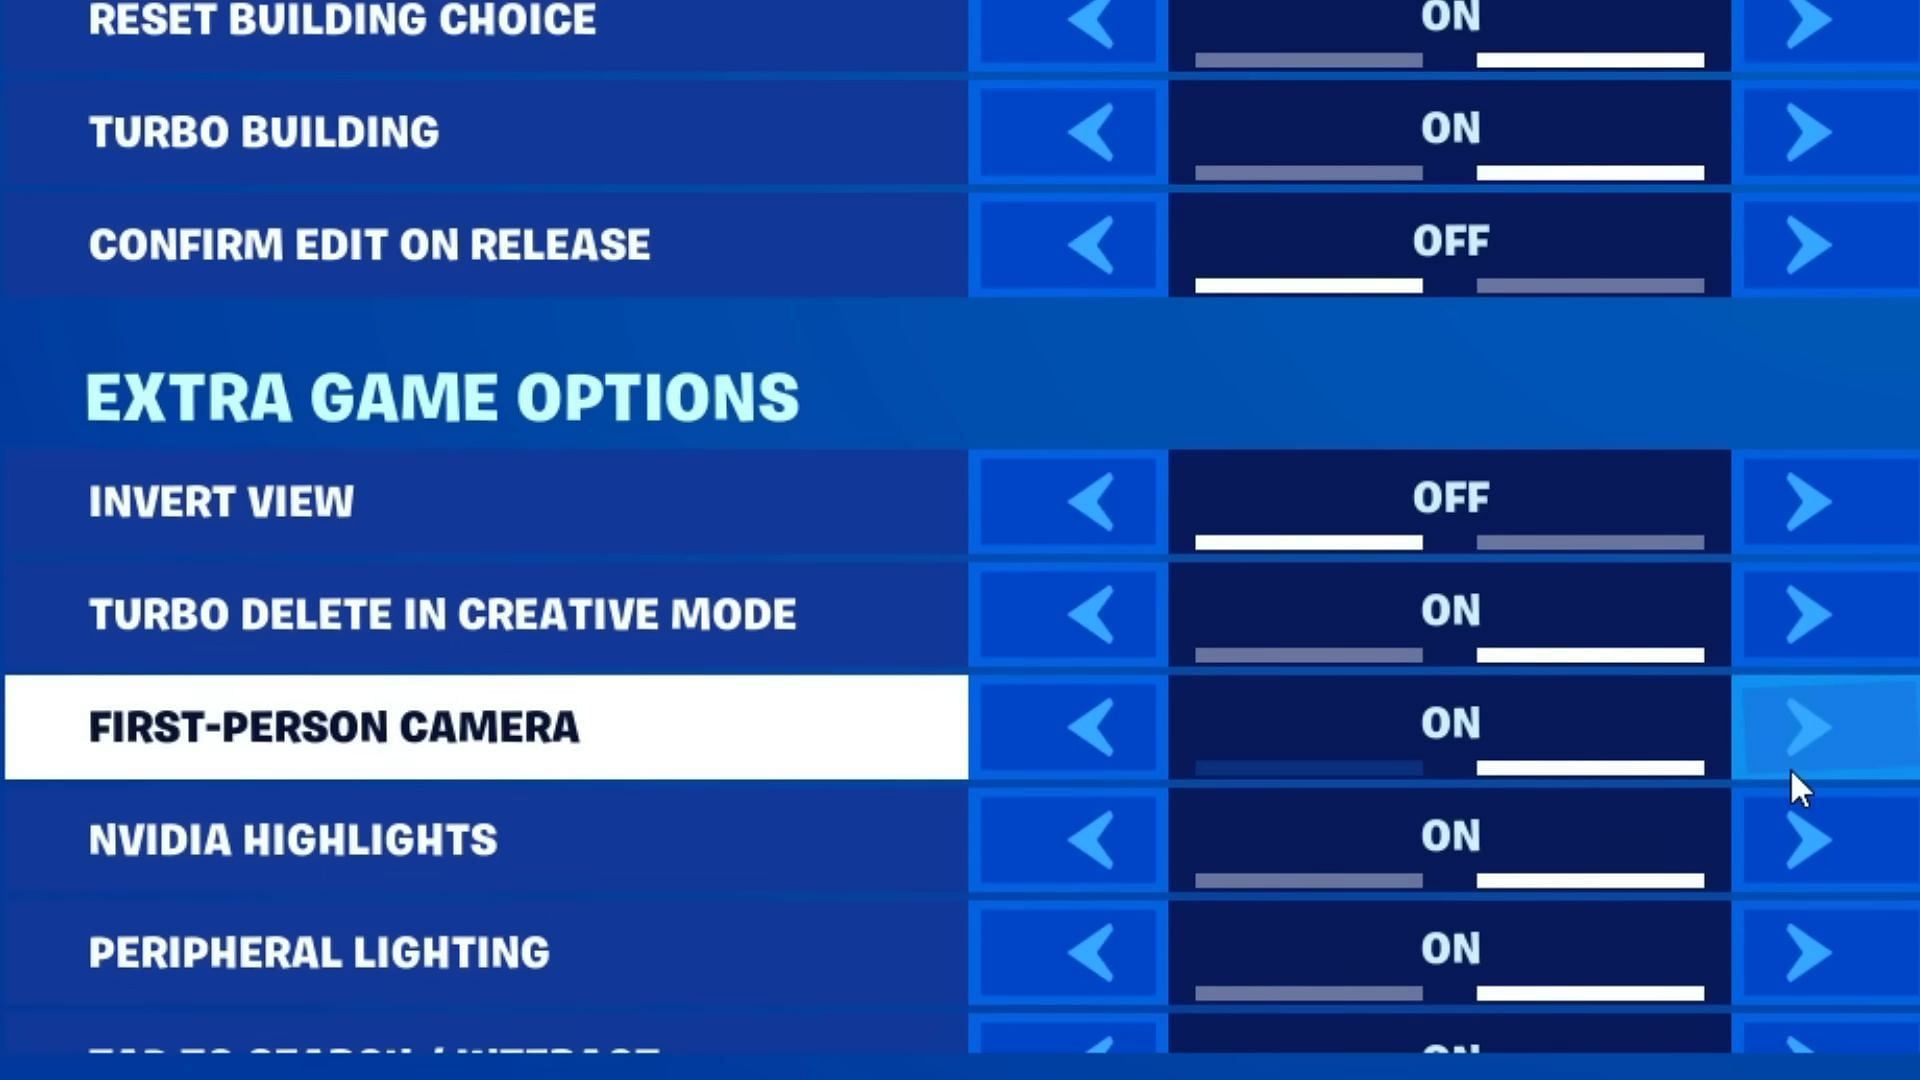 You can enable the first-person mode by opening the in-game settings (Image via Epic Games)